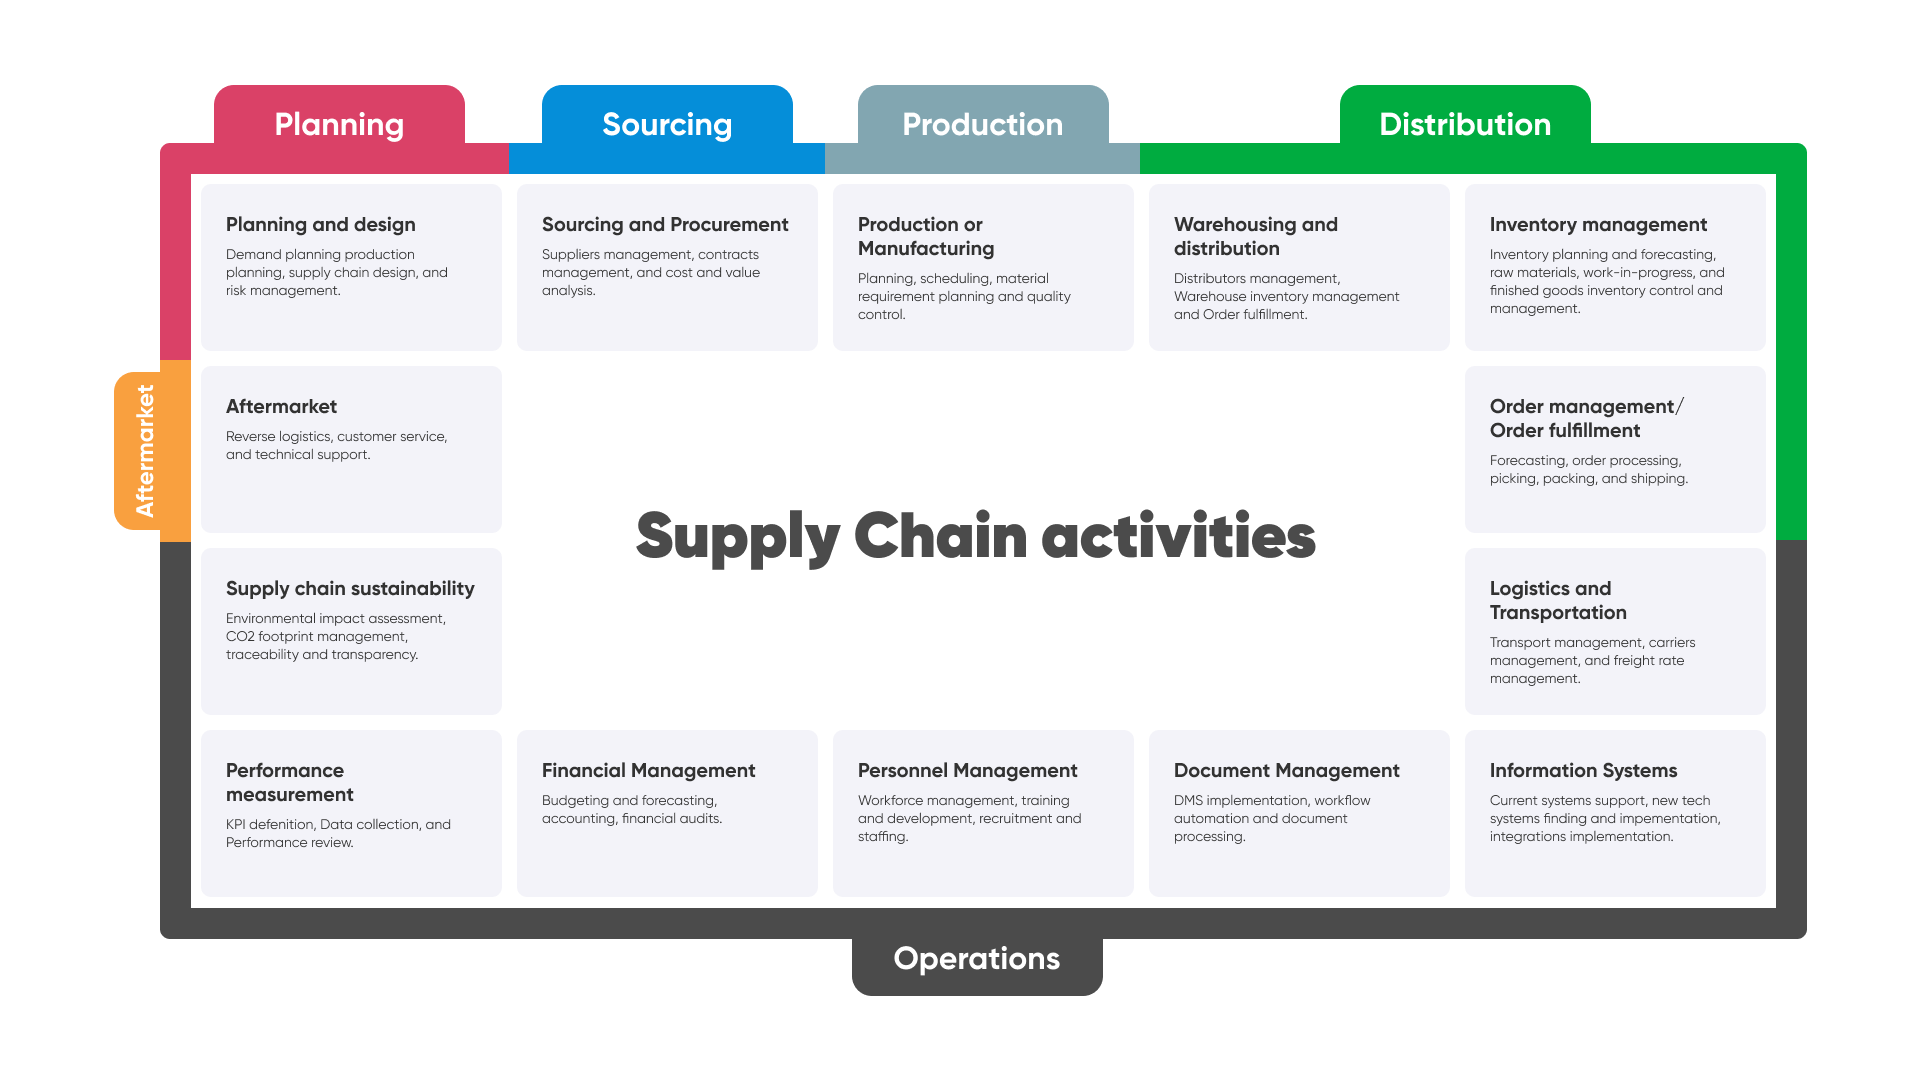 Supply chain services facilitating SCM activities 